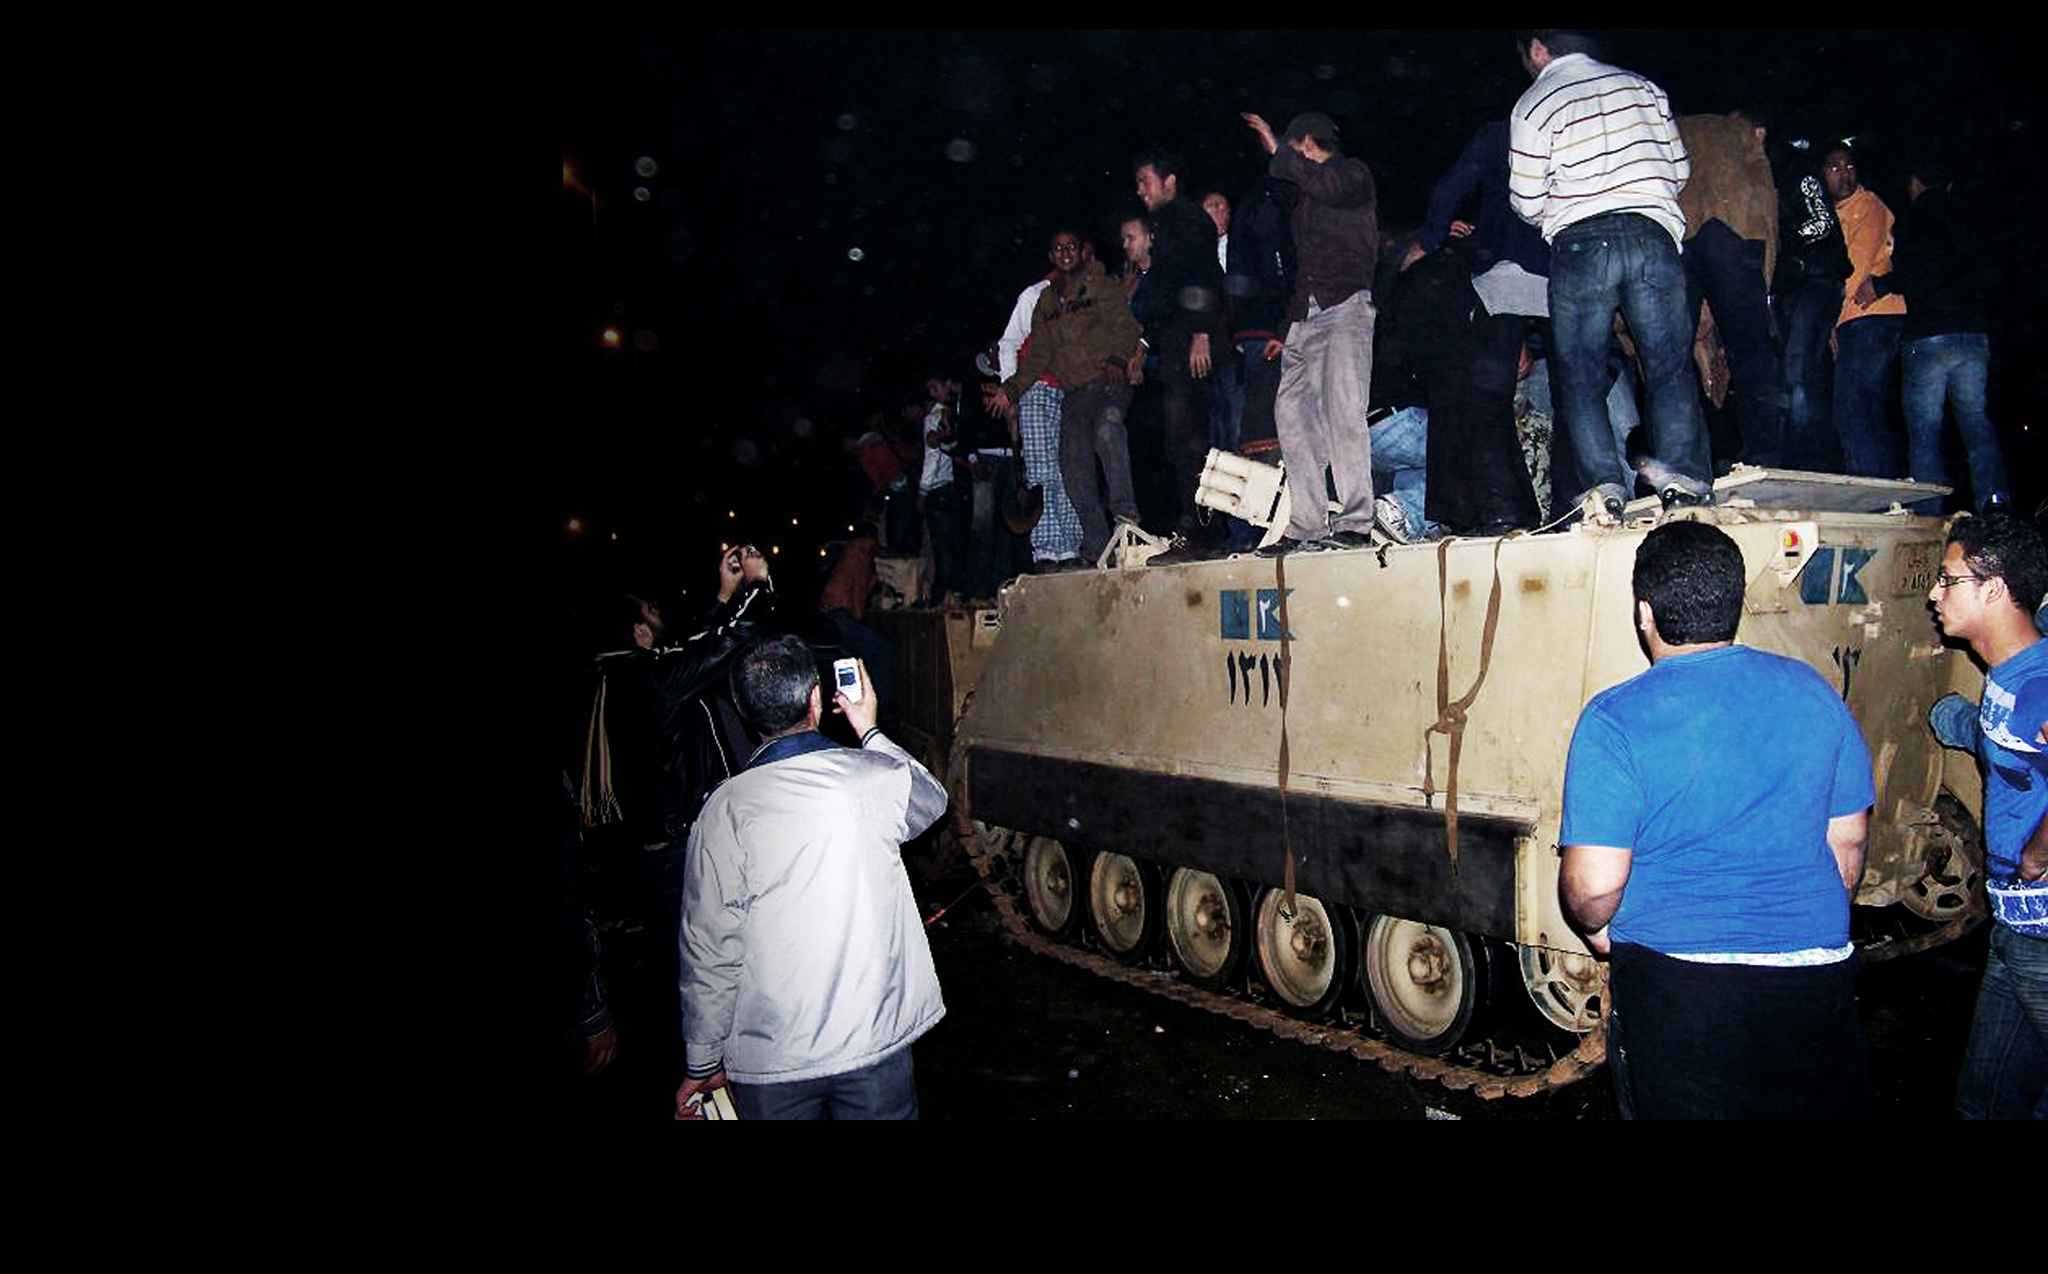 At nightfall, protesters interacted with the army, sent in to take over from police and restore order. <br>
(Photo credit: Adel Gastel)
